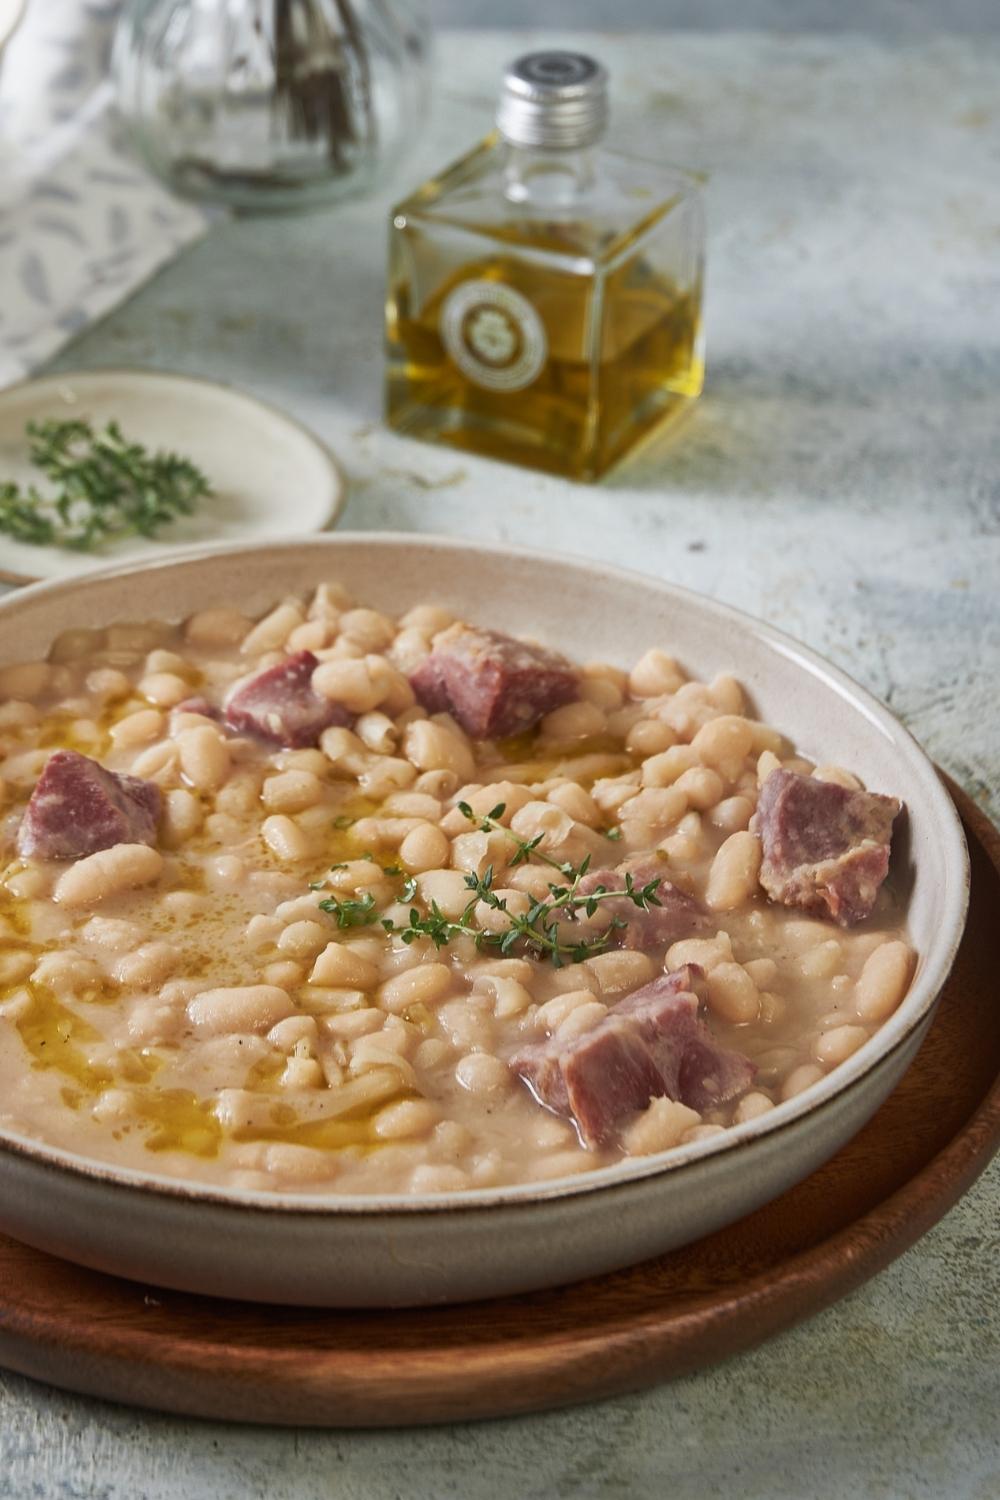 A big bowl of great northern beans with ham served on a wooden plate tray.